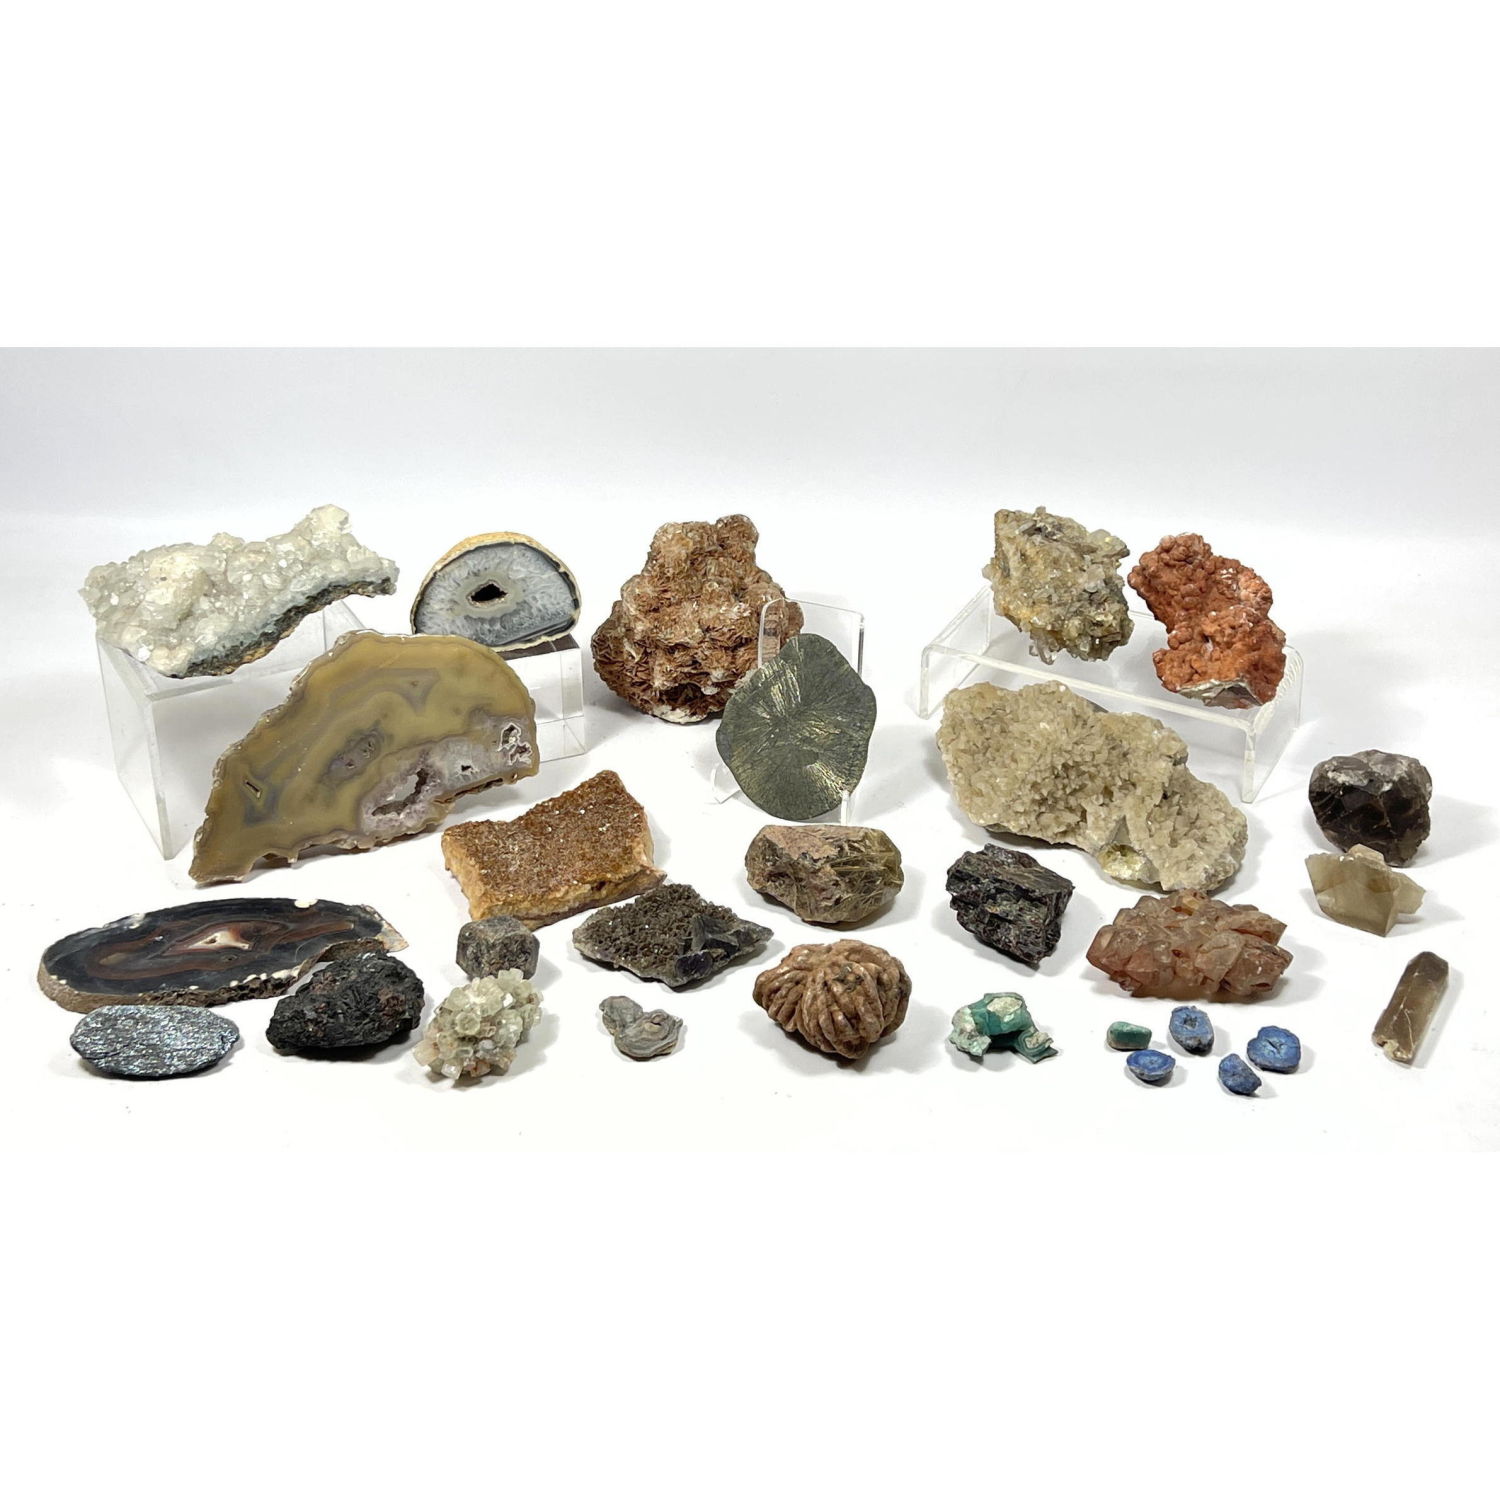 Collection of Small Rocks and Mineral 2fedce